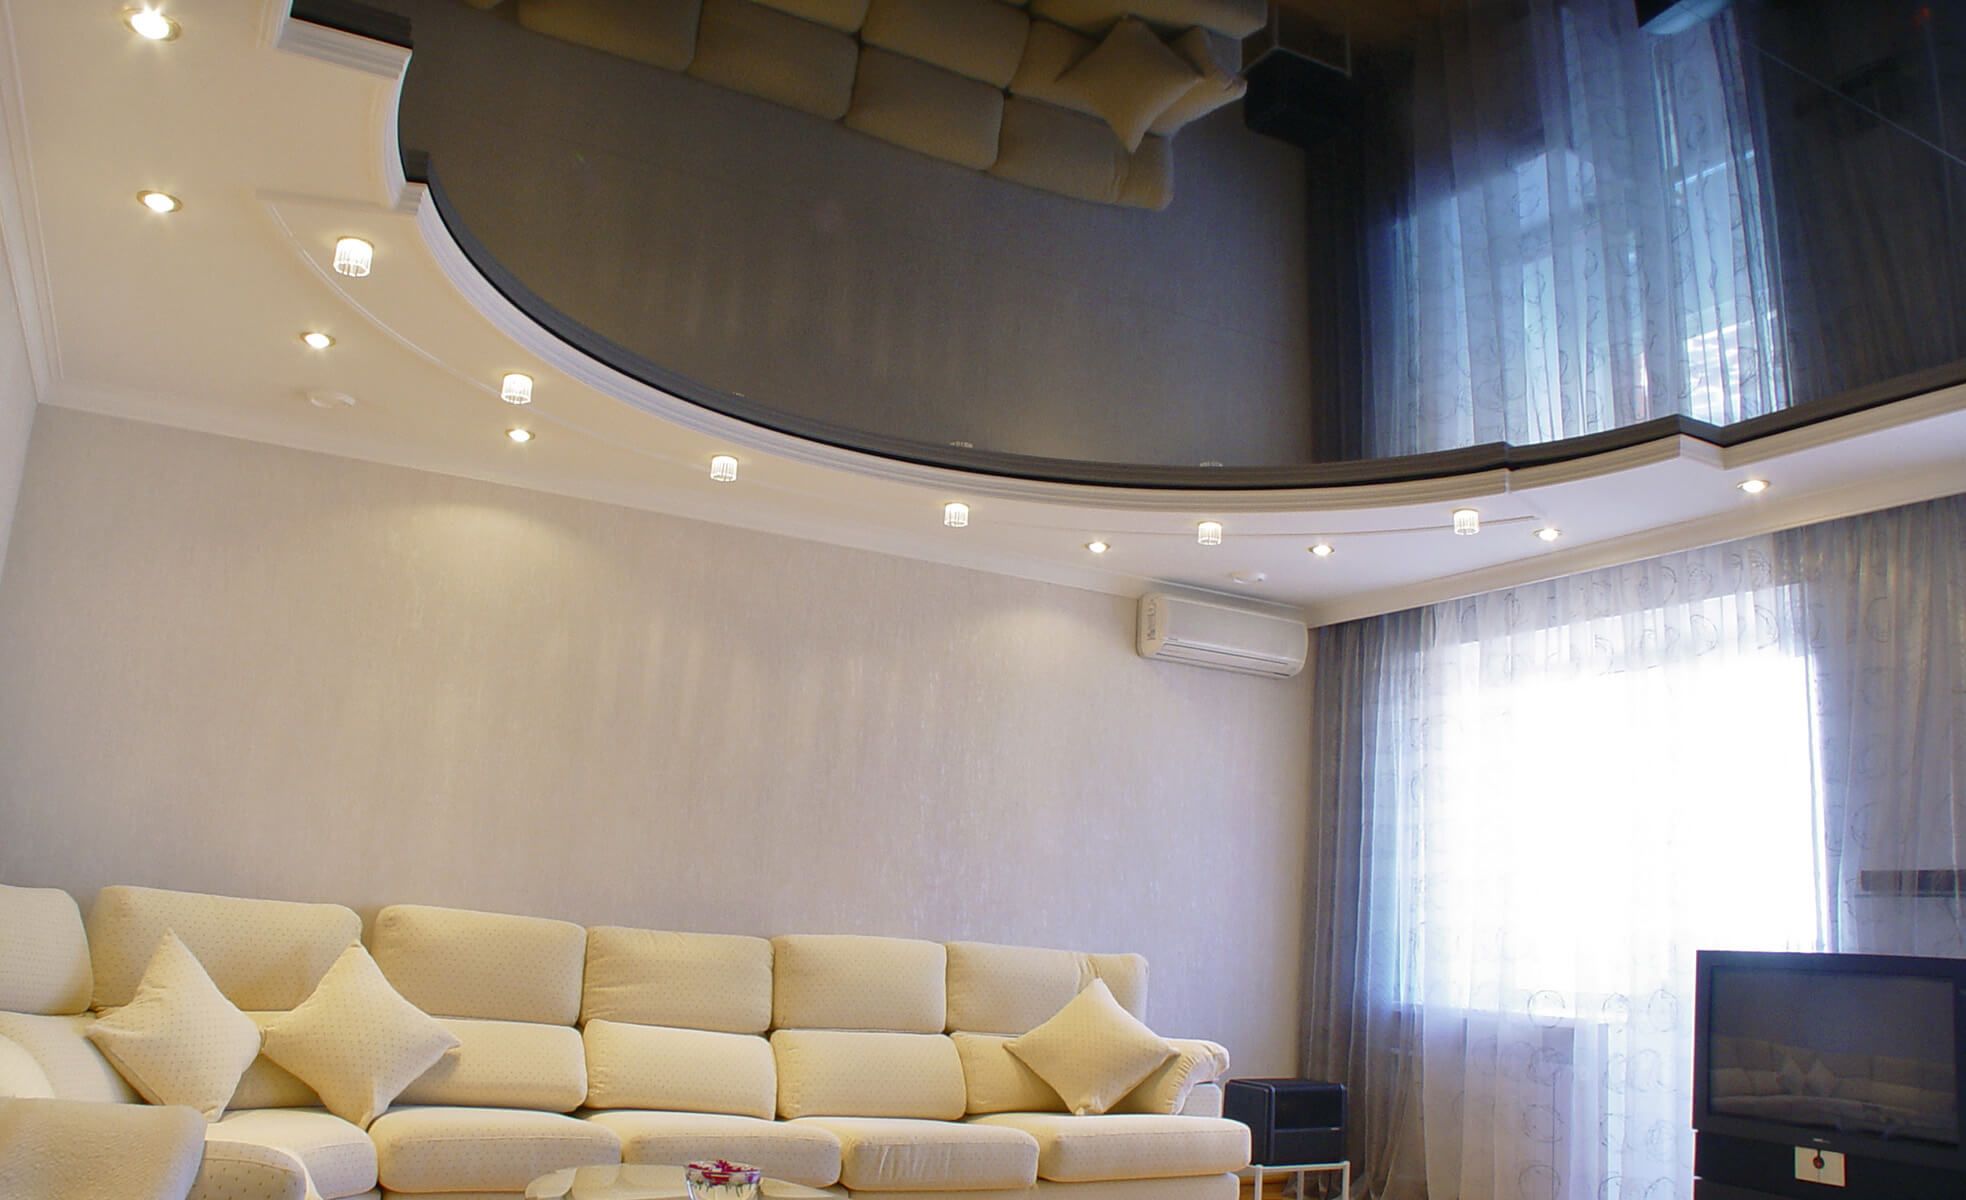 Stretch Ceilings: Types, Advantages, Disadvantages and Photos. Spectacular mirroring surface of the PVC ceiling 